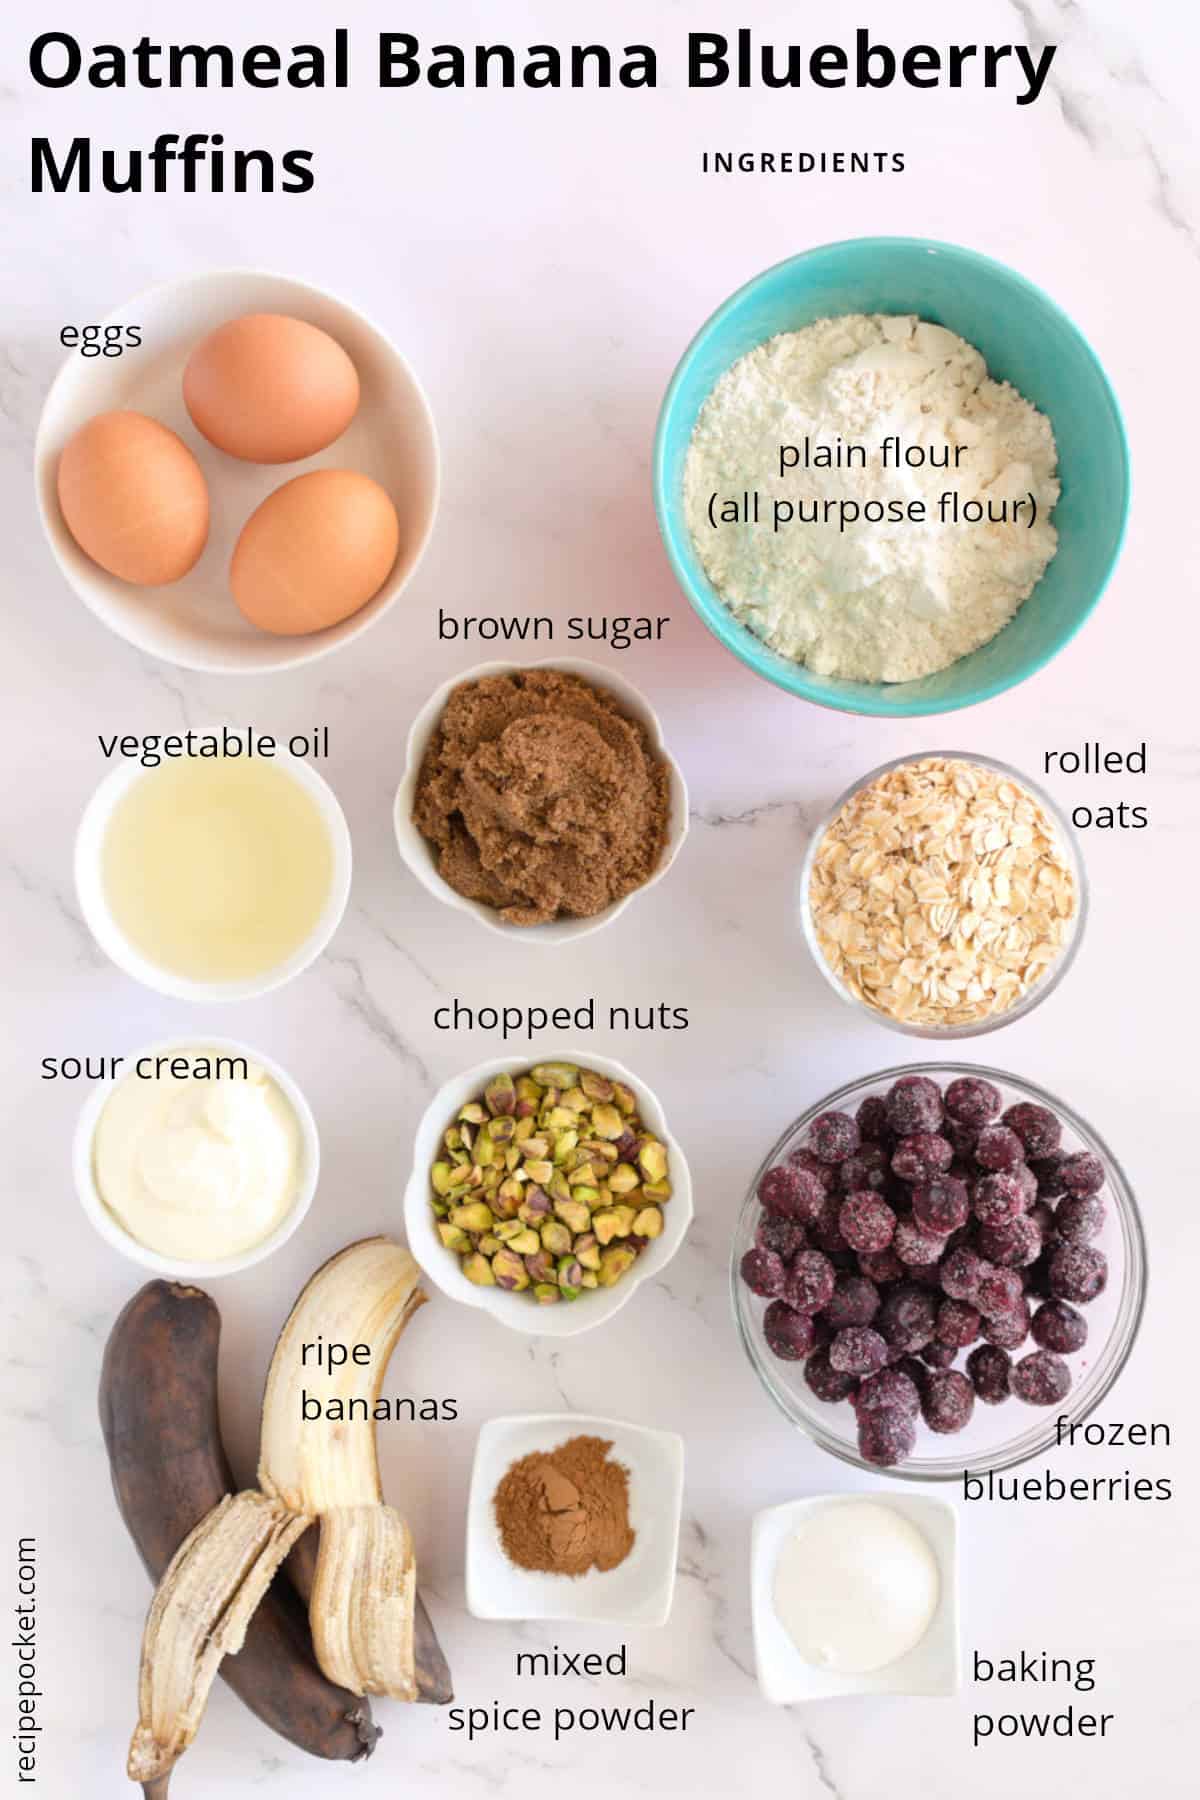 Image of ingredients used to make oatmeal banana and blueberry muffins.